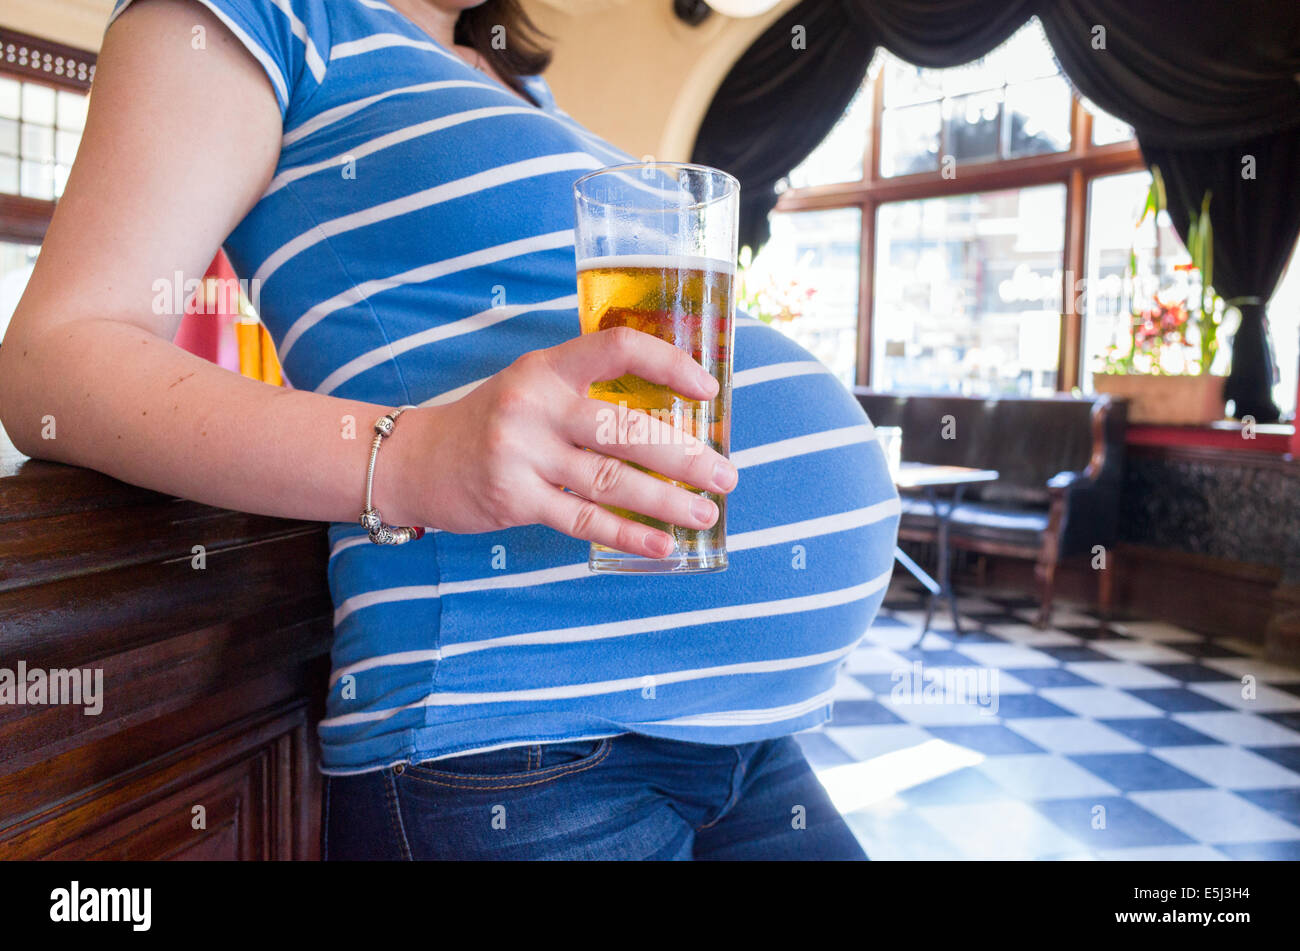 Pregnant woman drinking a pint of beer in pub, London, England, UK Stock Photo